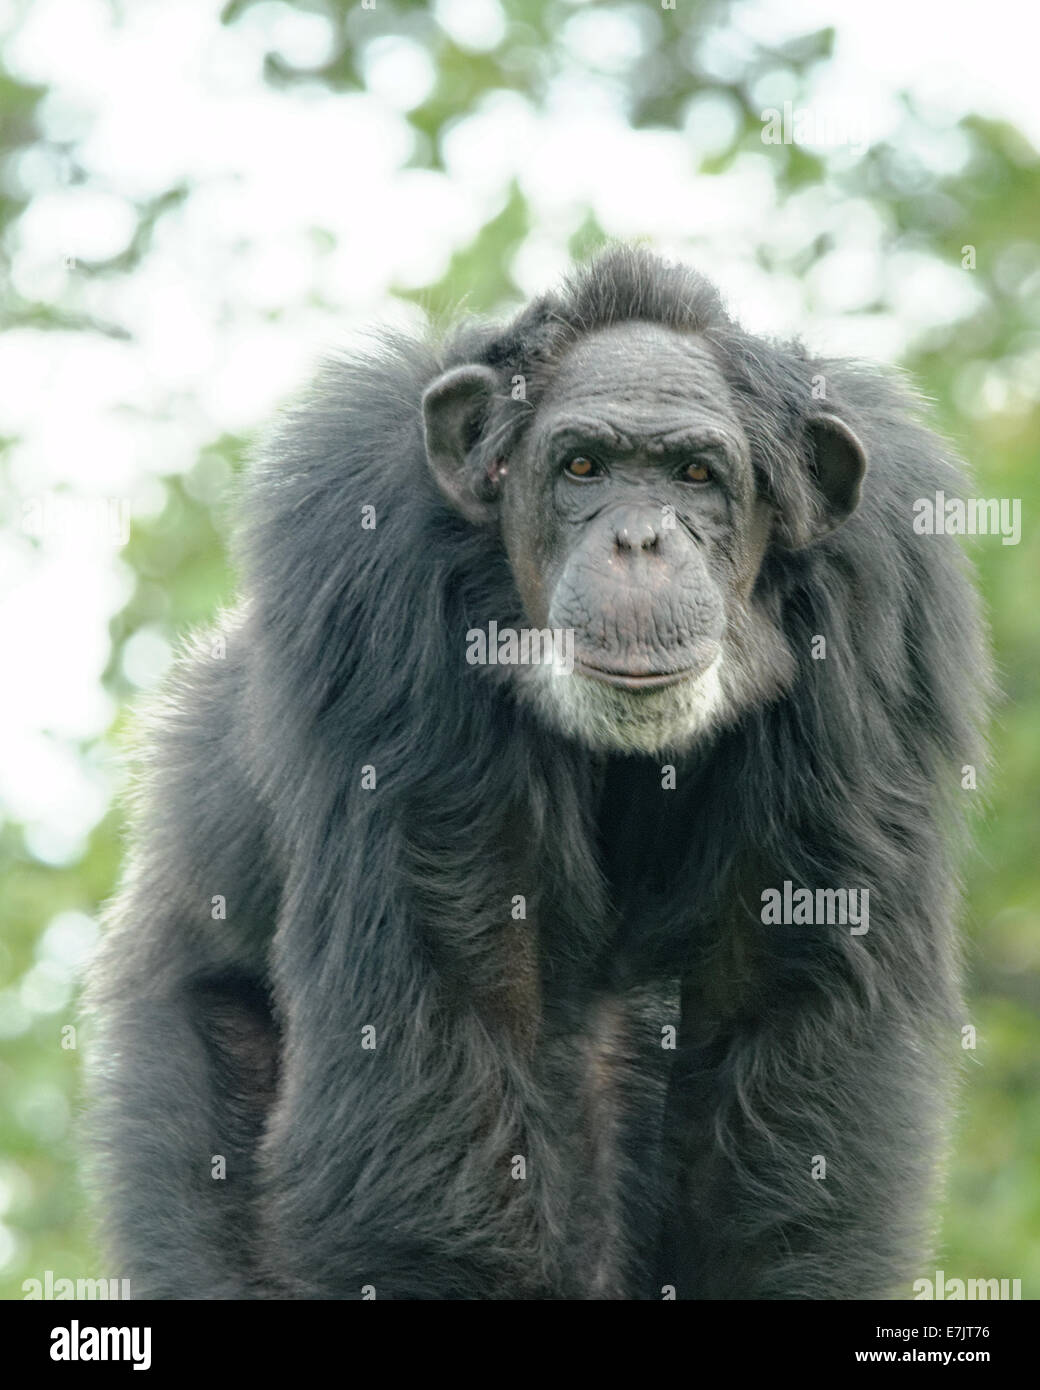 Common chimpanzee (Pan troglodytes), also known as the robust chimpanzee, is a species of great ape. Stock Photo